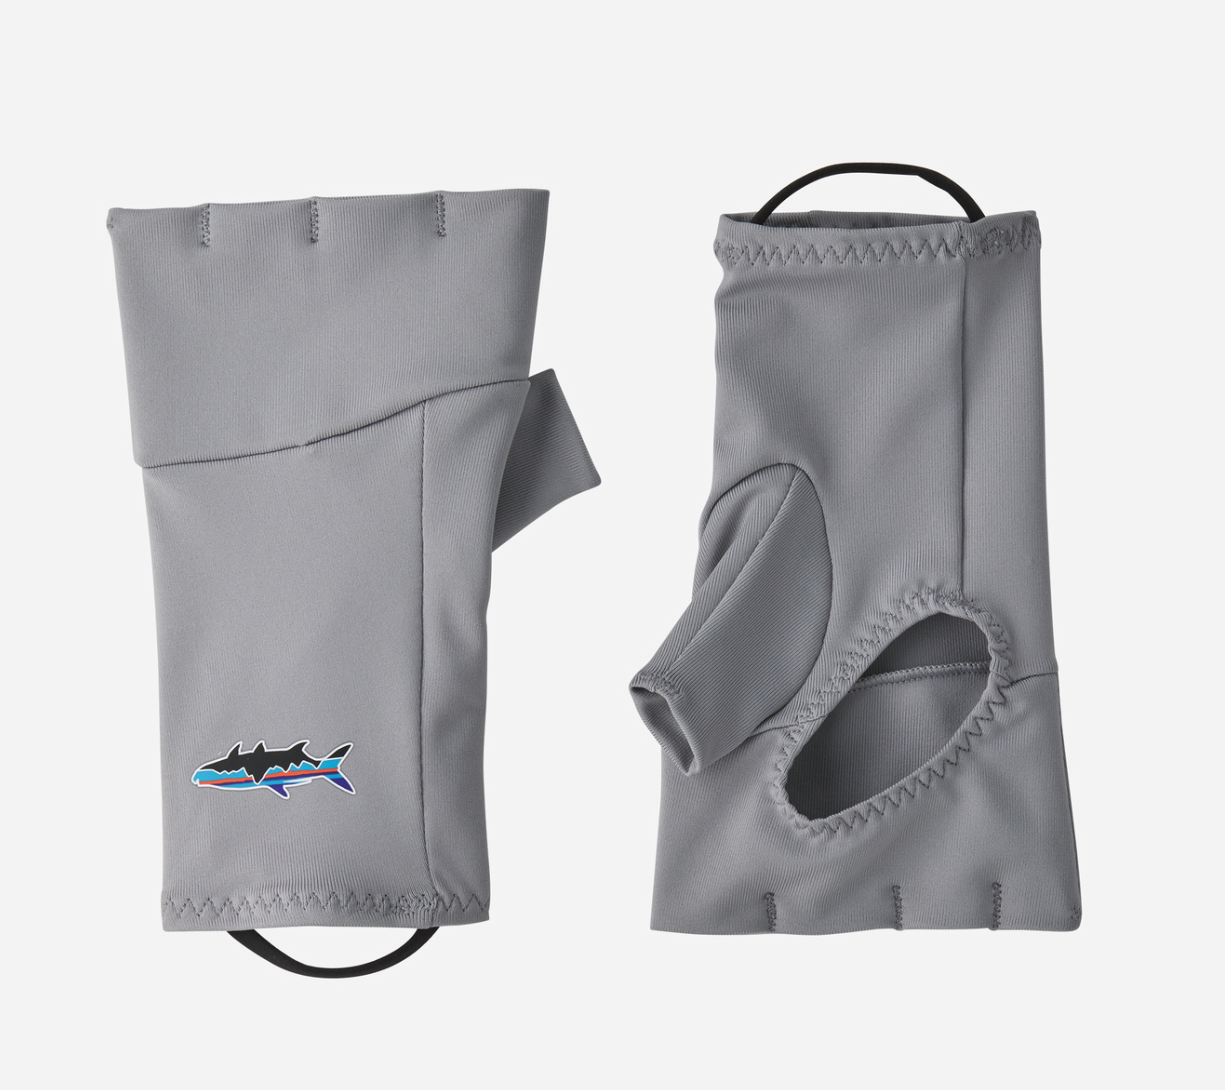 https://www.theflyfishers.com/Content/files/Patagonia/Gloves/SunGloves81737SGRY.png